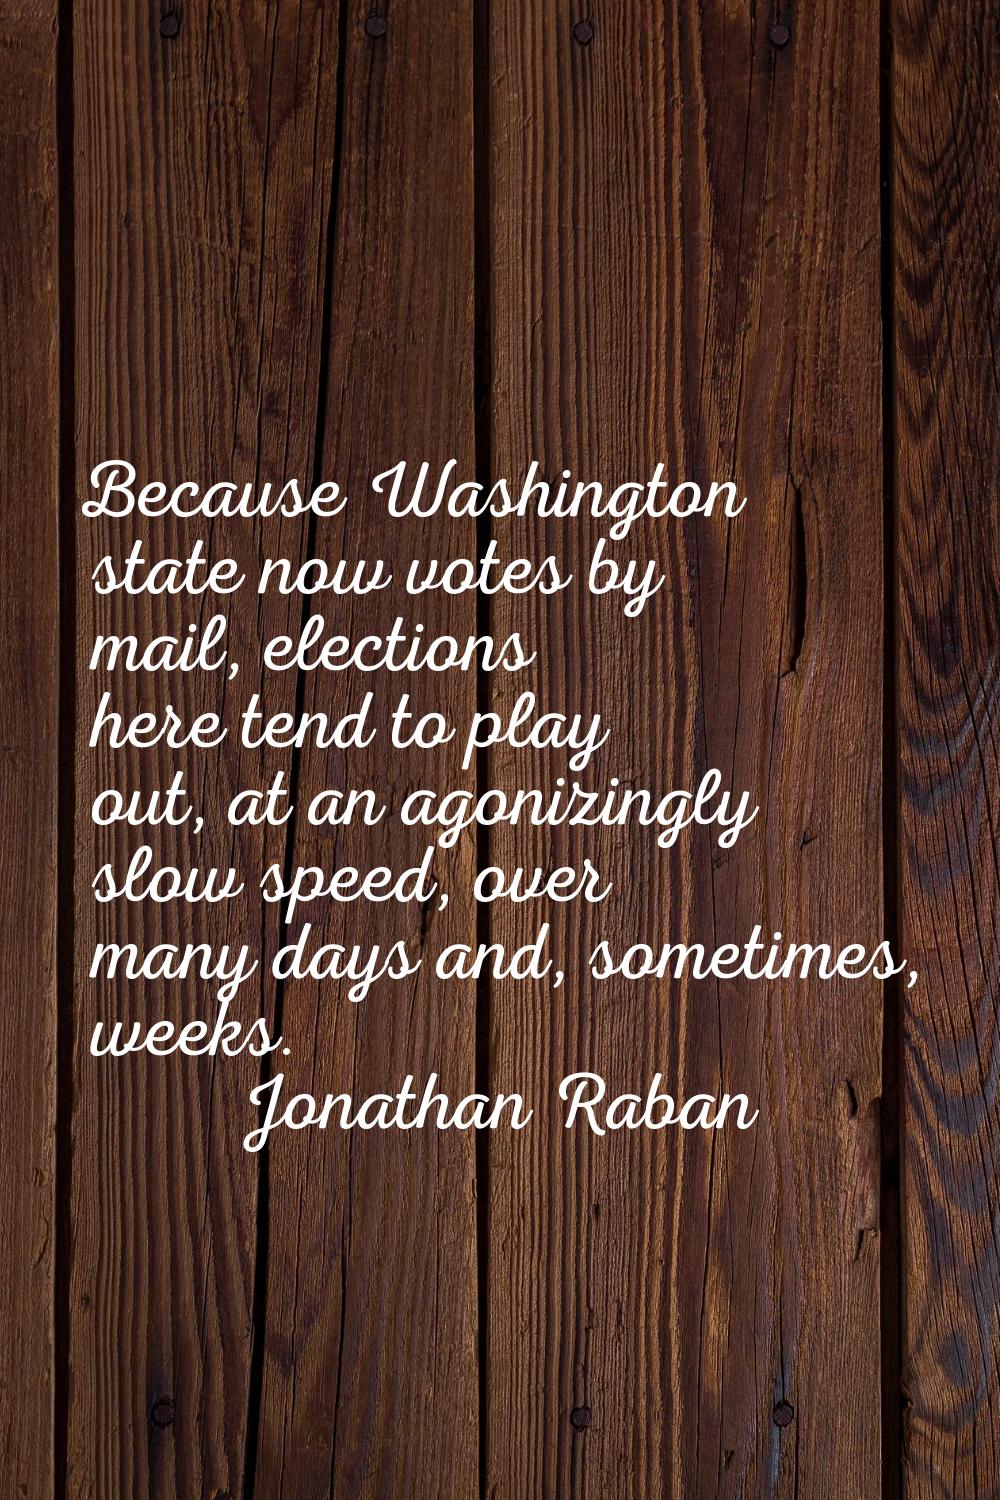 Because Washington state now votes by mail, elections here tend to play out, at an agonizingly slow